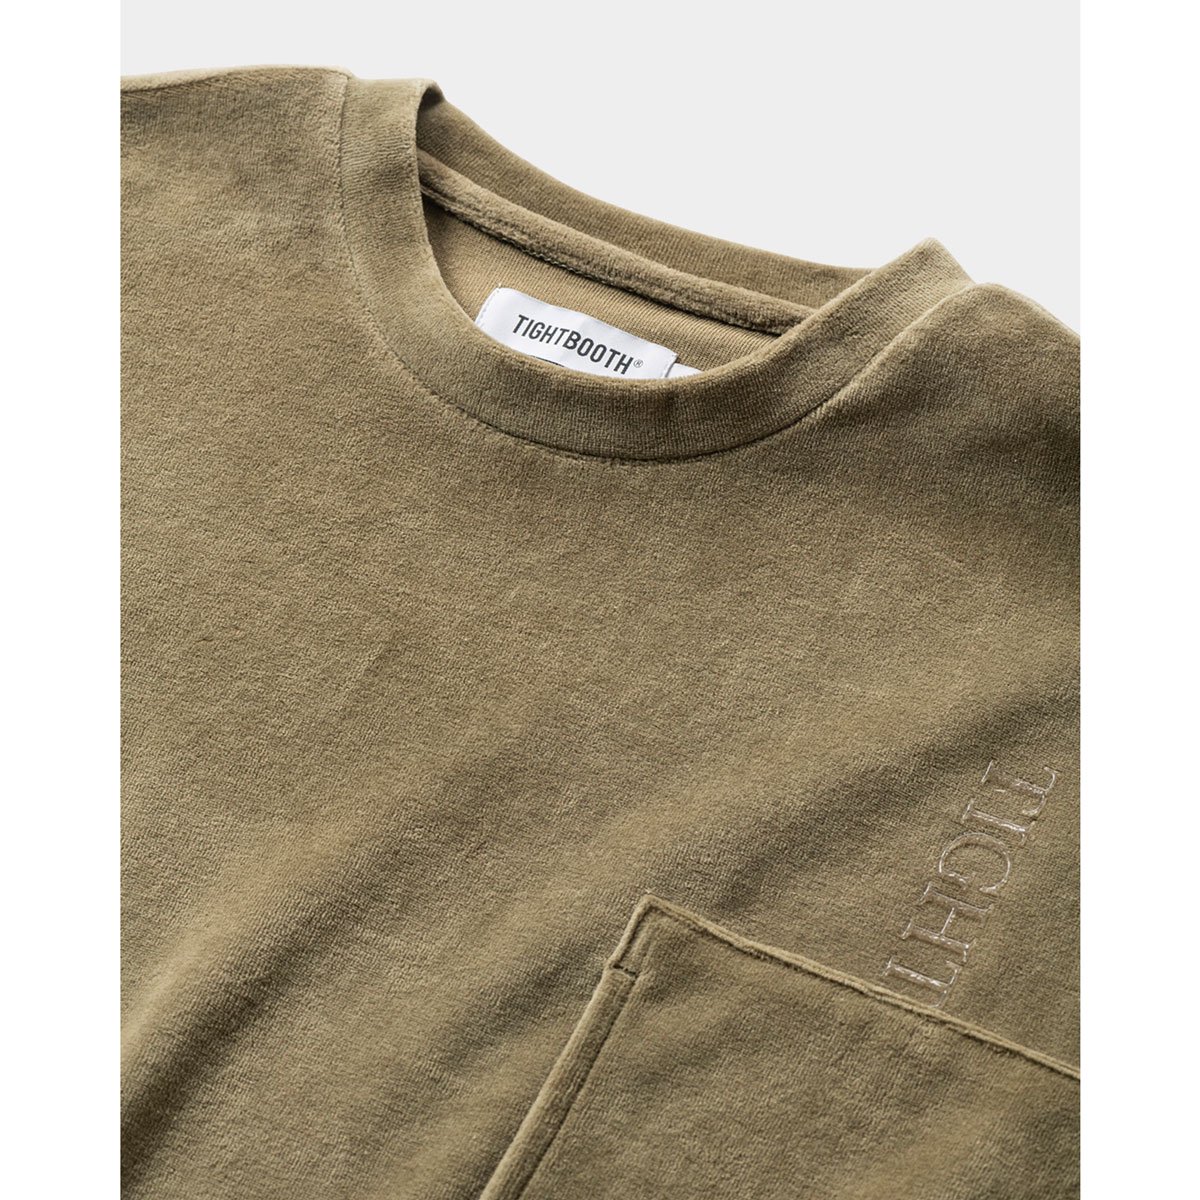 TIGHTBOOTH - STRAIGHT UP VELOUR T-SHIRT - SHRED